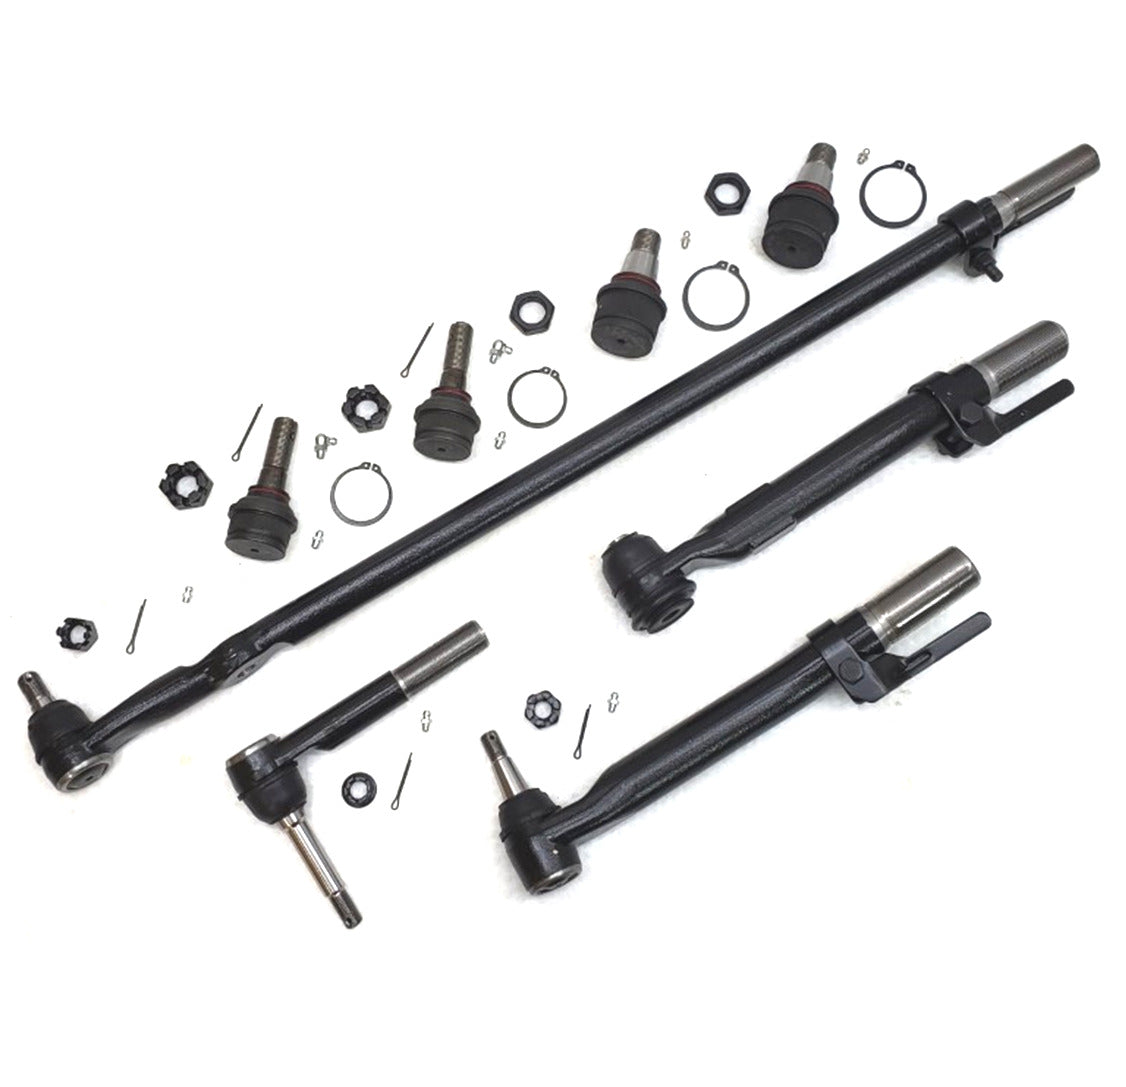 HD Ball Joint Tie Rod Drag Link Steering Kit for 2005-2007 Ford F250, F350 4x4